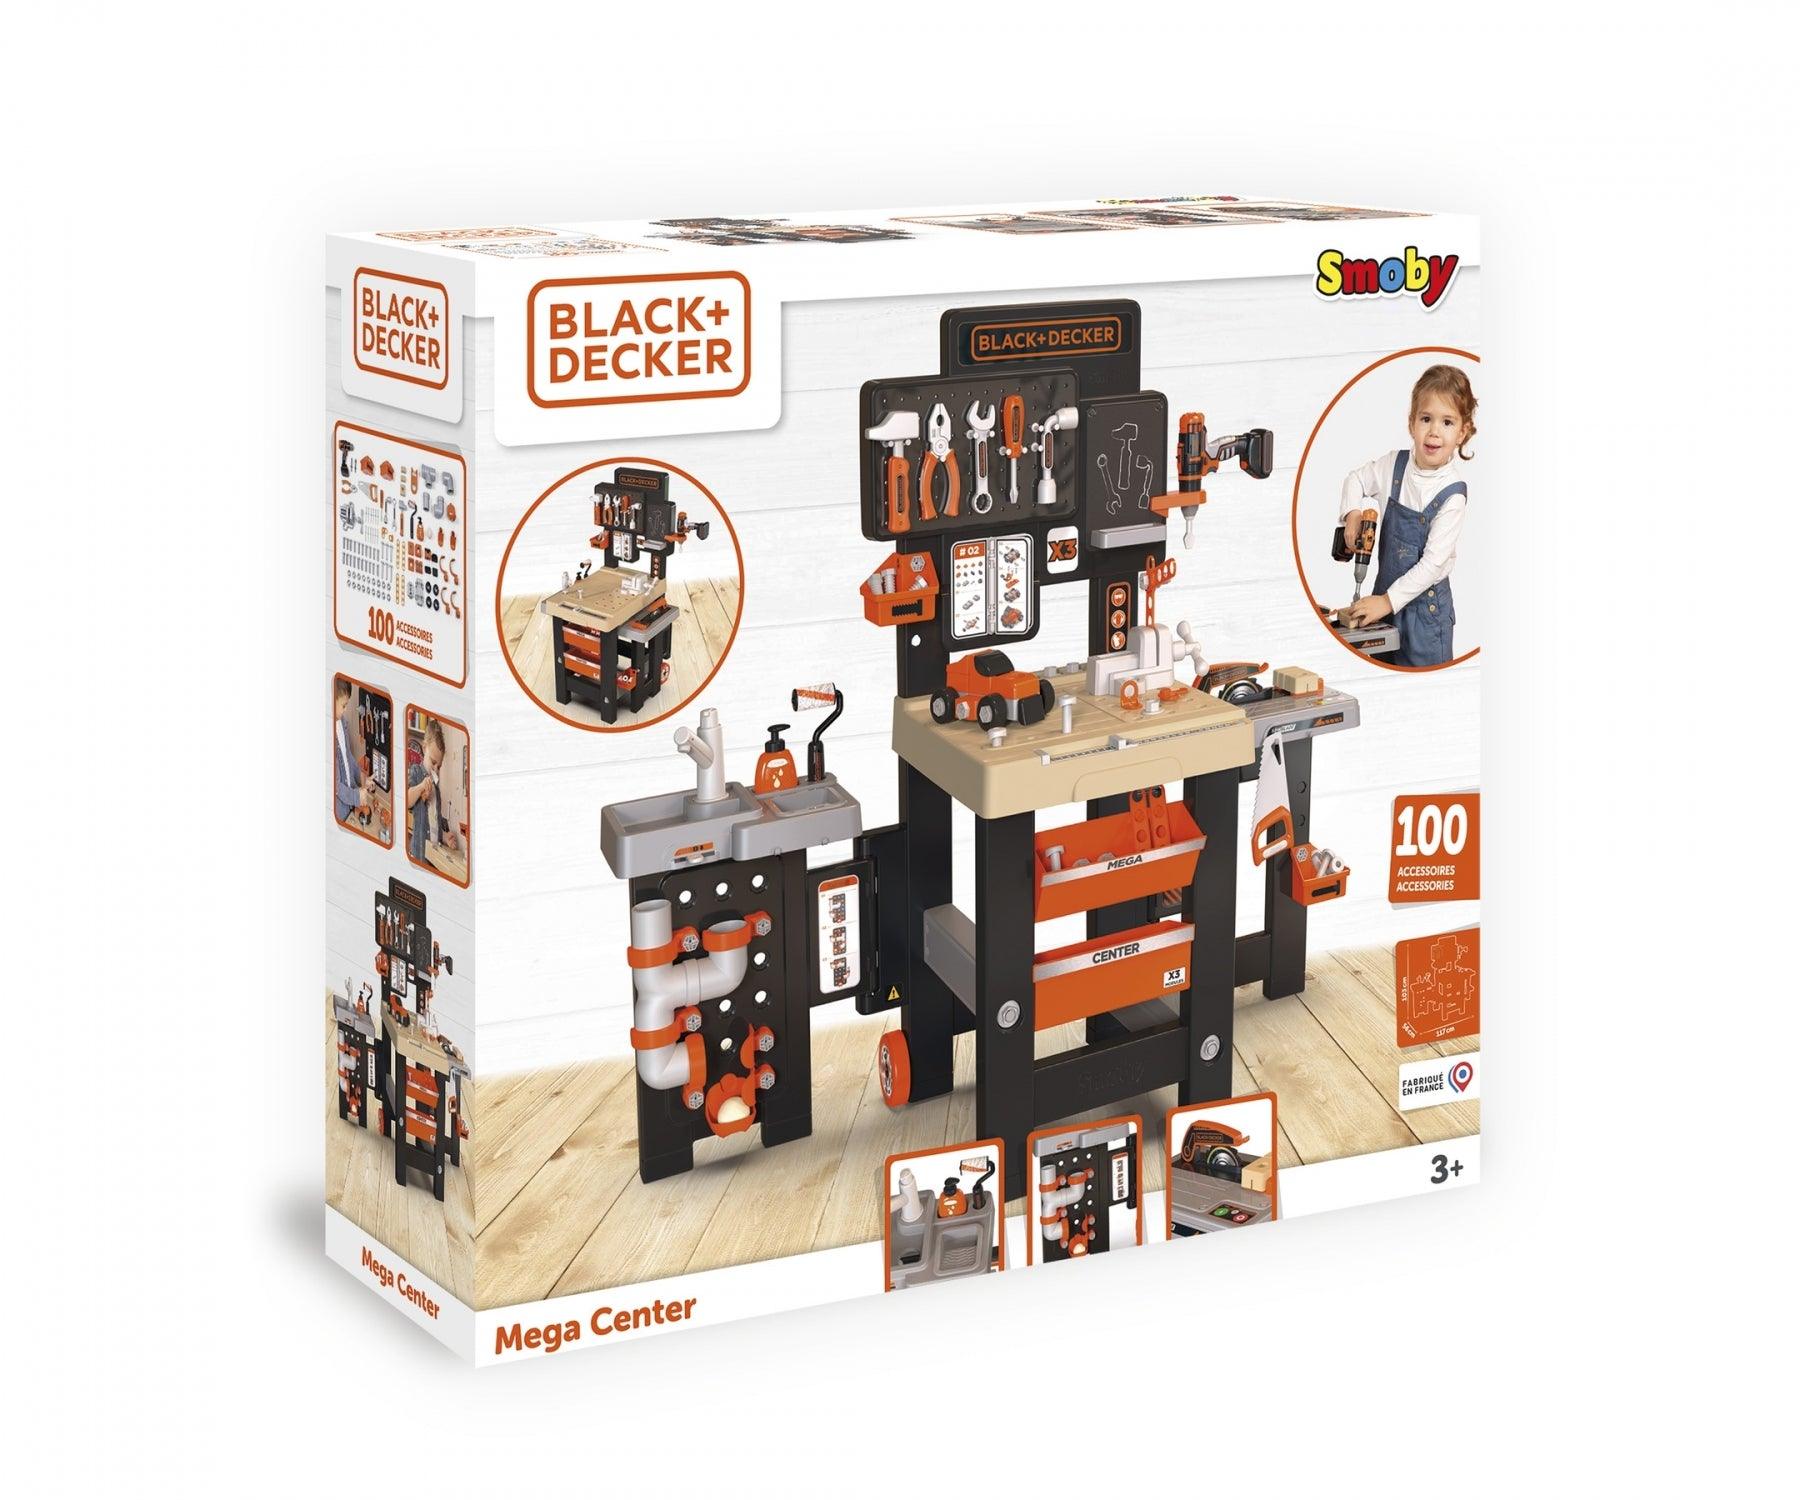 Smoby Black + Decker Bricolo Center Ultimate Workbench and DIY Roleplay  Accessories